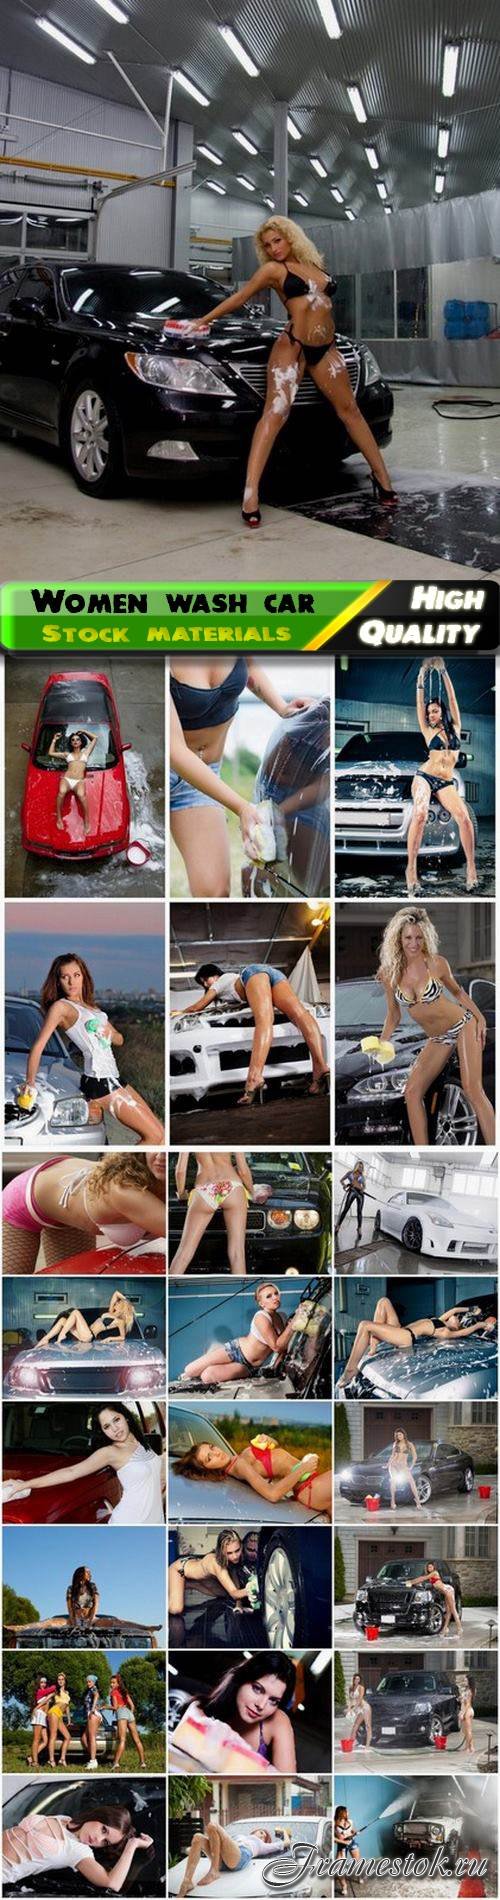 Erotic women and sexy girl wash car and automobile - 25 HQ Jpg